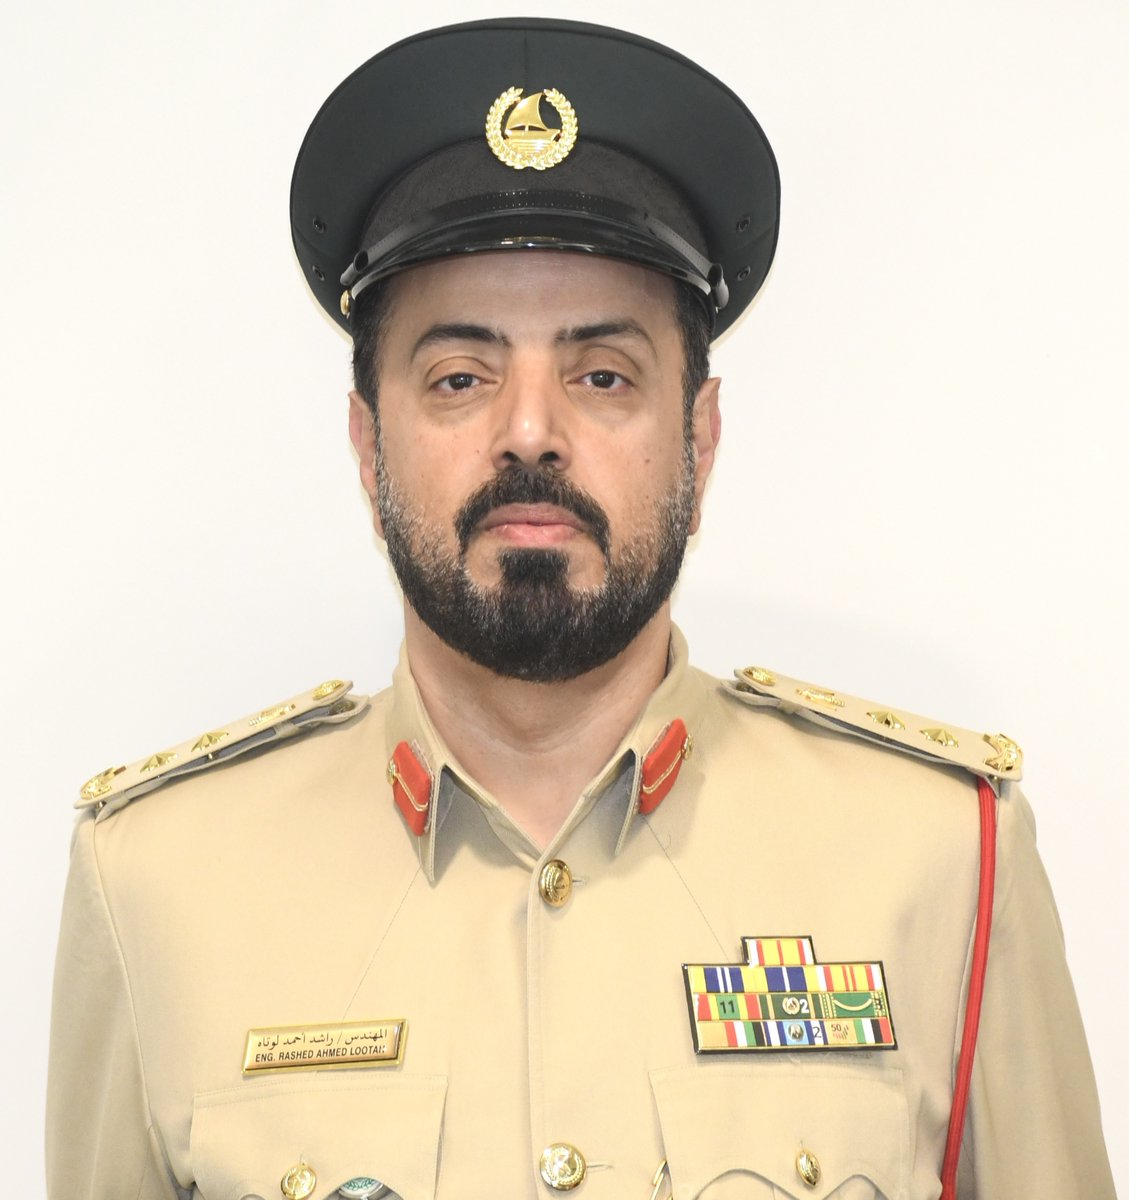 #News | Dubai Police Cuts Electronic Evidence Processing Time by Over Half

Details:
dubaipolice.gov.ae/wps/portal/hom…

#YourSecurityOurHappiness
#SmartSecureTogether